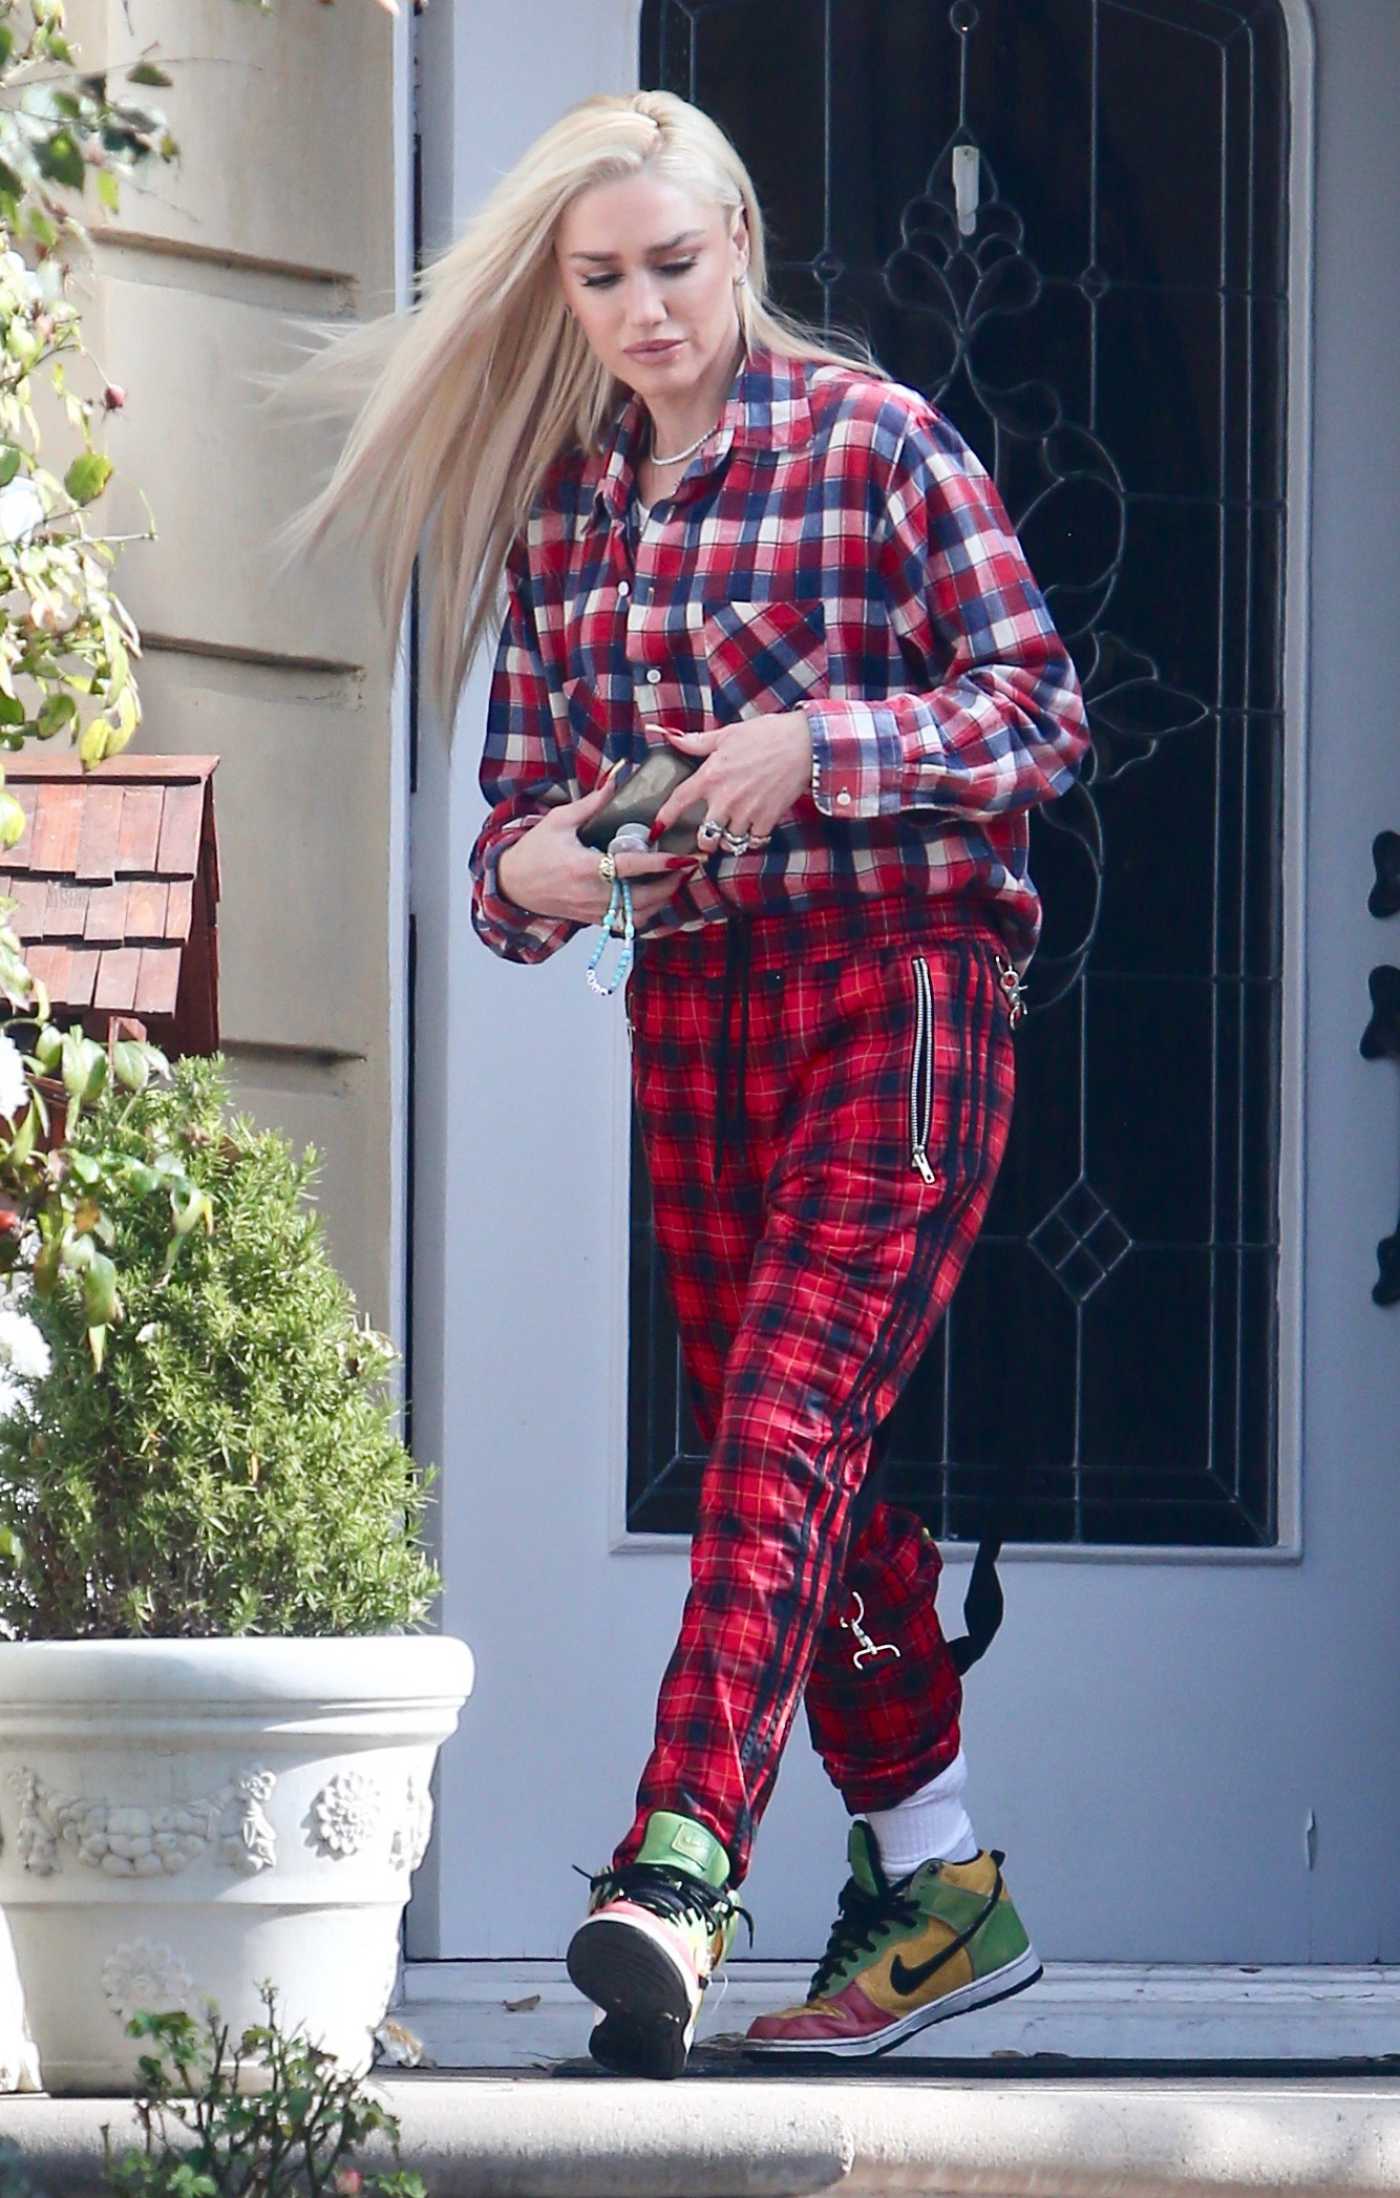 Gwen Stefani in a Plaid Outfit Was Seen Out in Los Angeles 12/05/2021